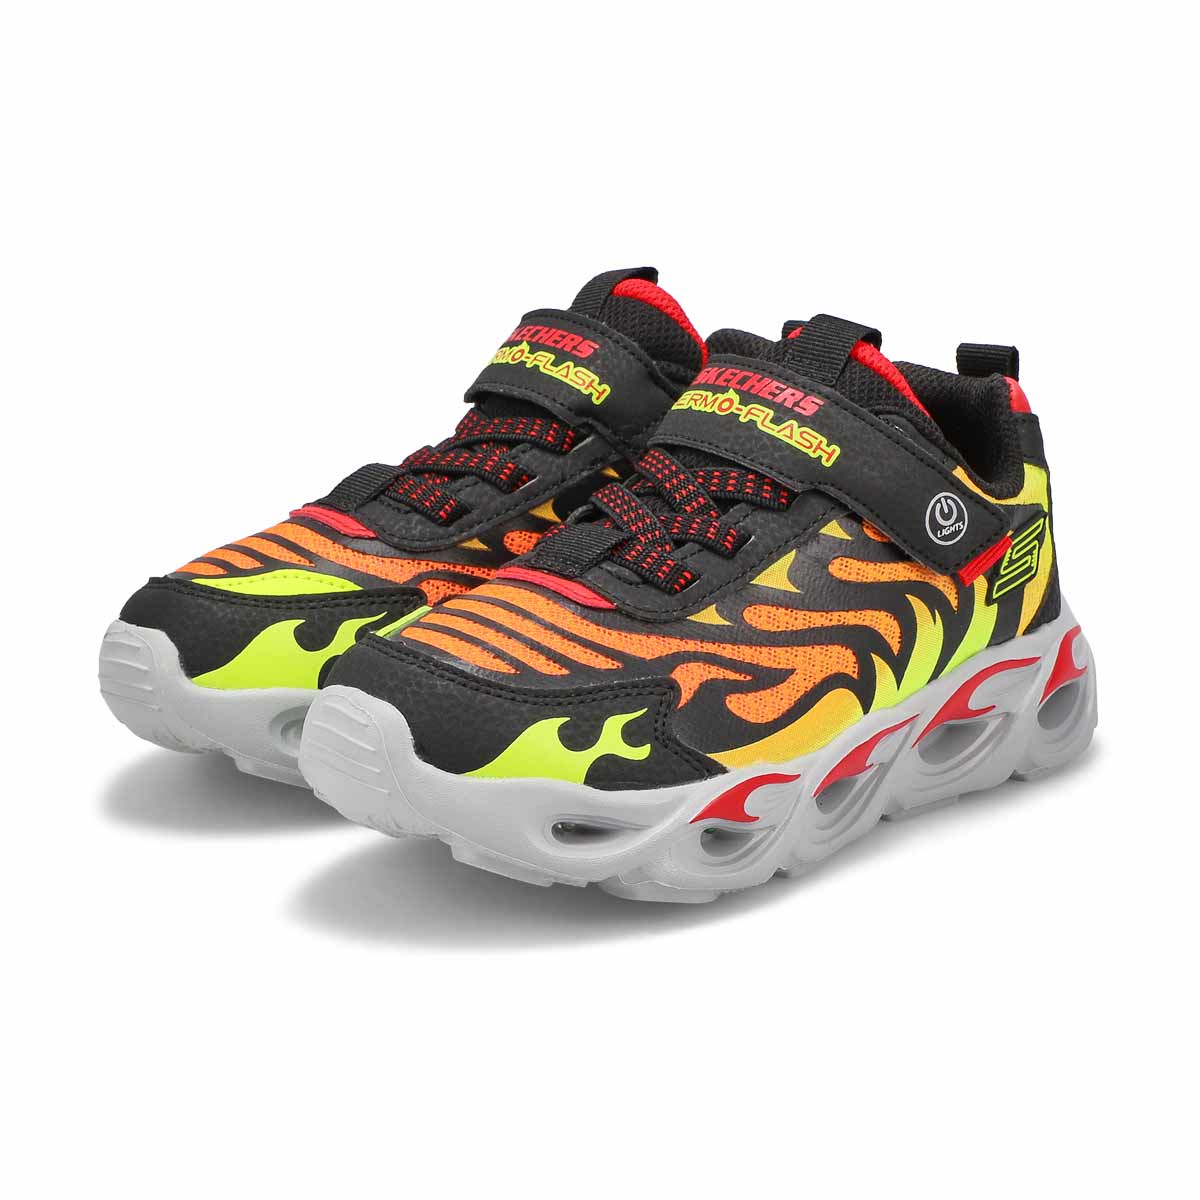 Skechers Boys' Thermo-Flash Light Up Sneakers | SoftMoc.com